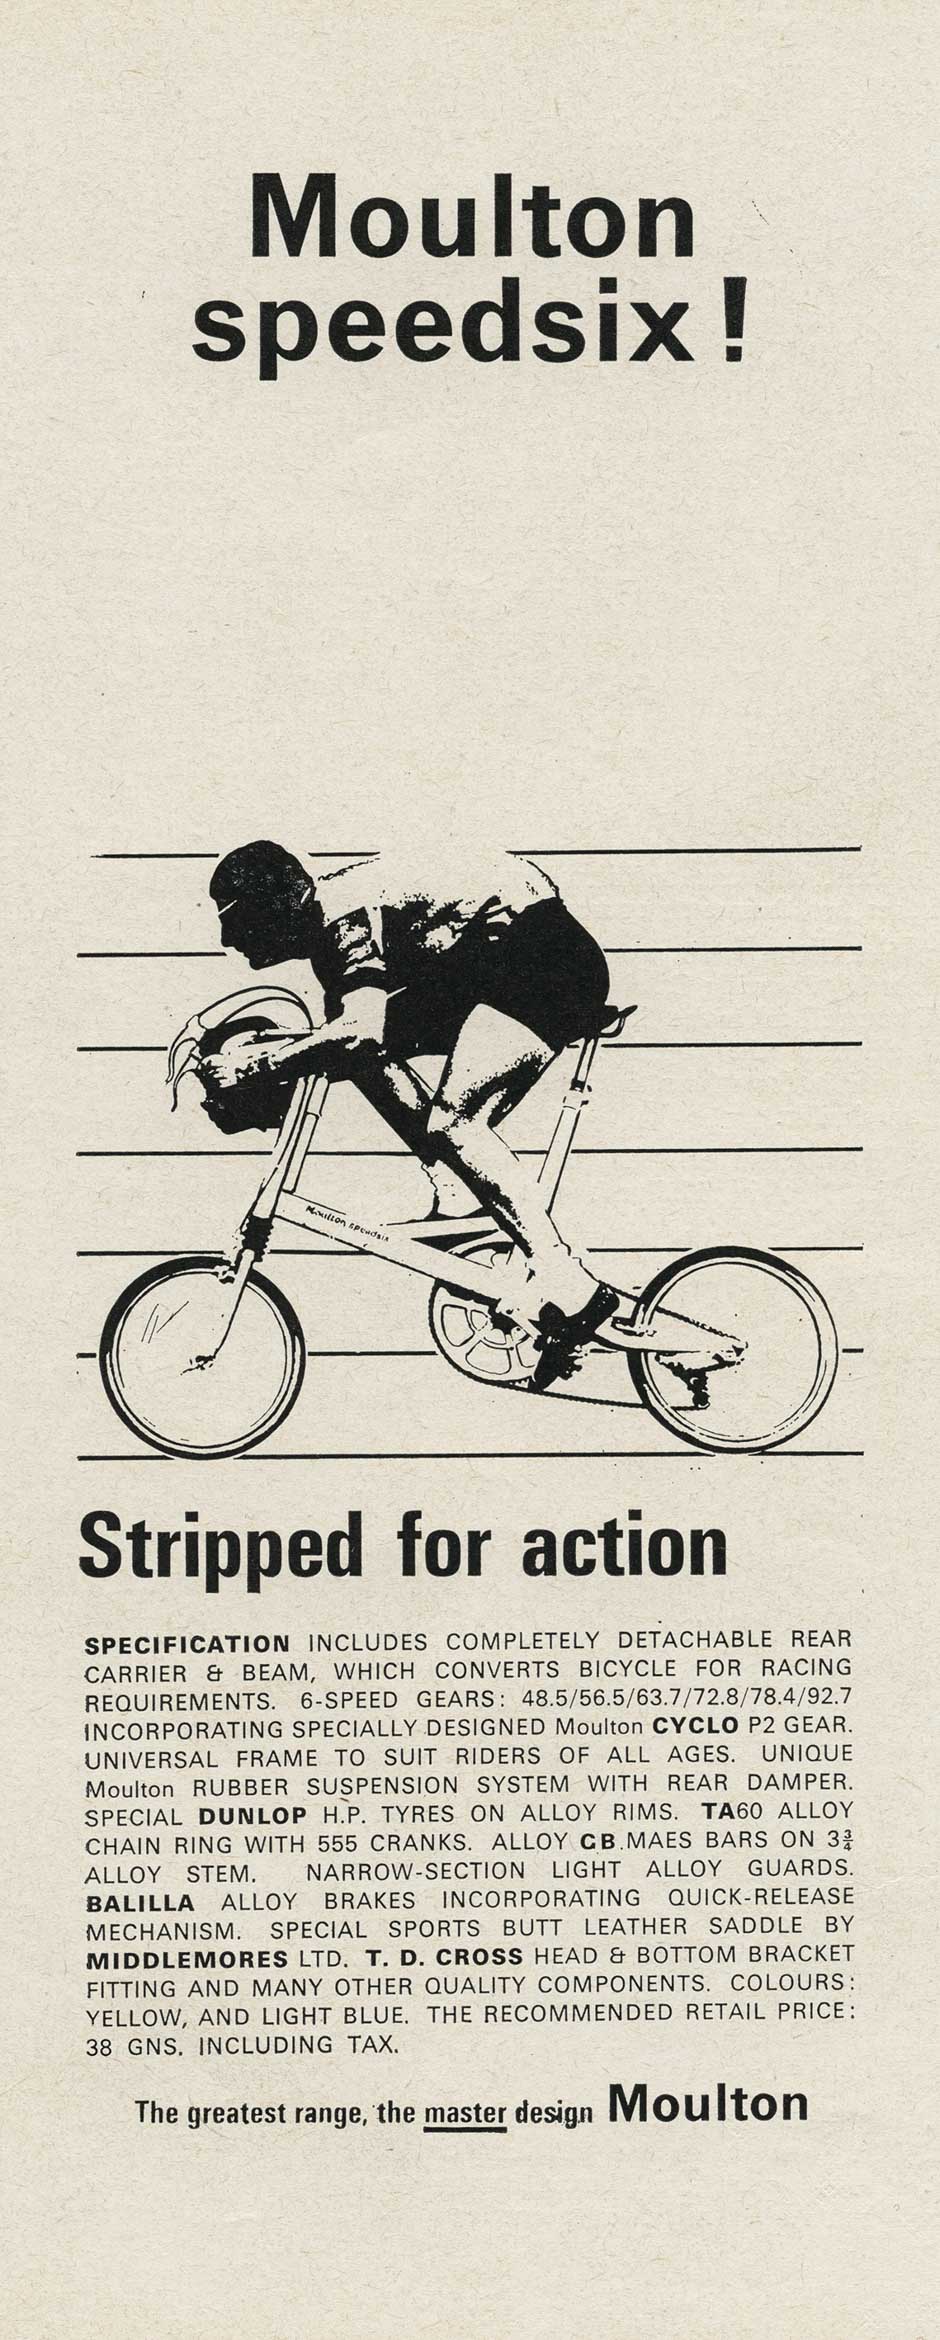 Sporting Cyclist October 1965 Moulton advert 01 main image